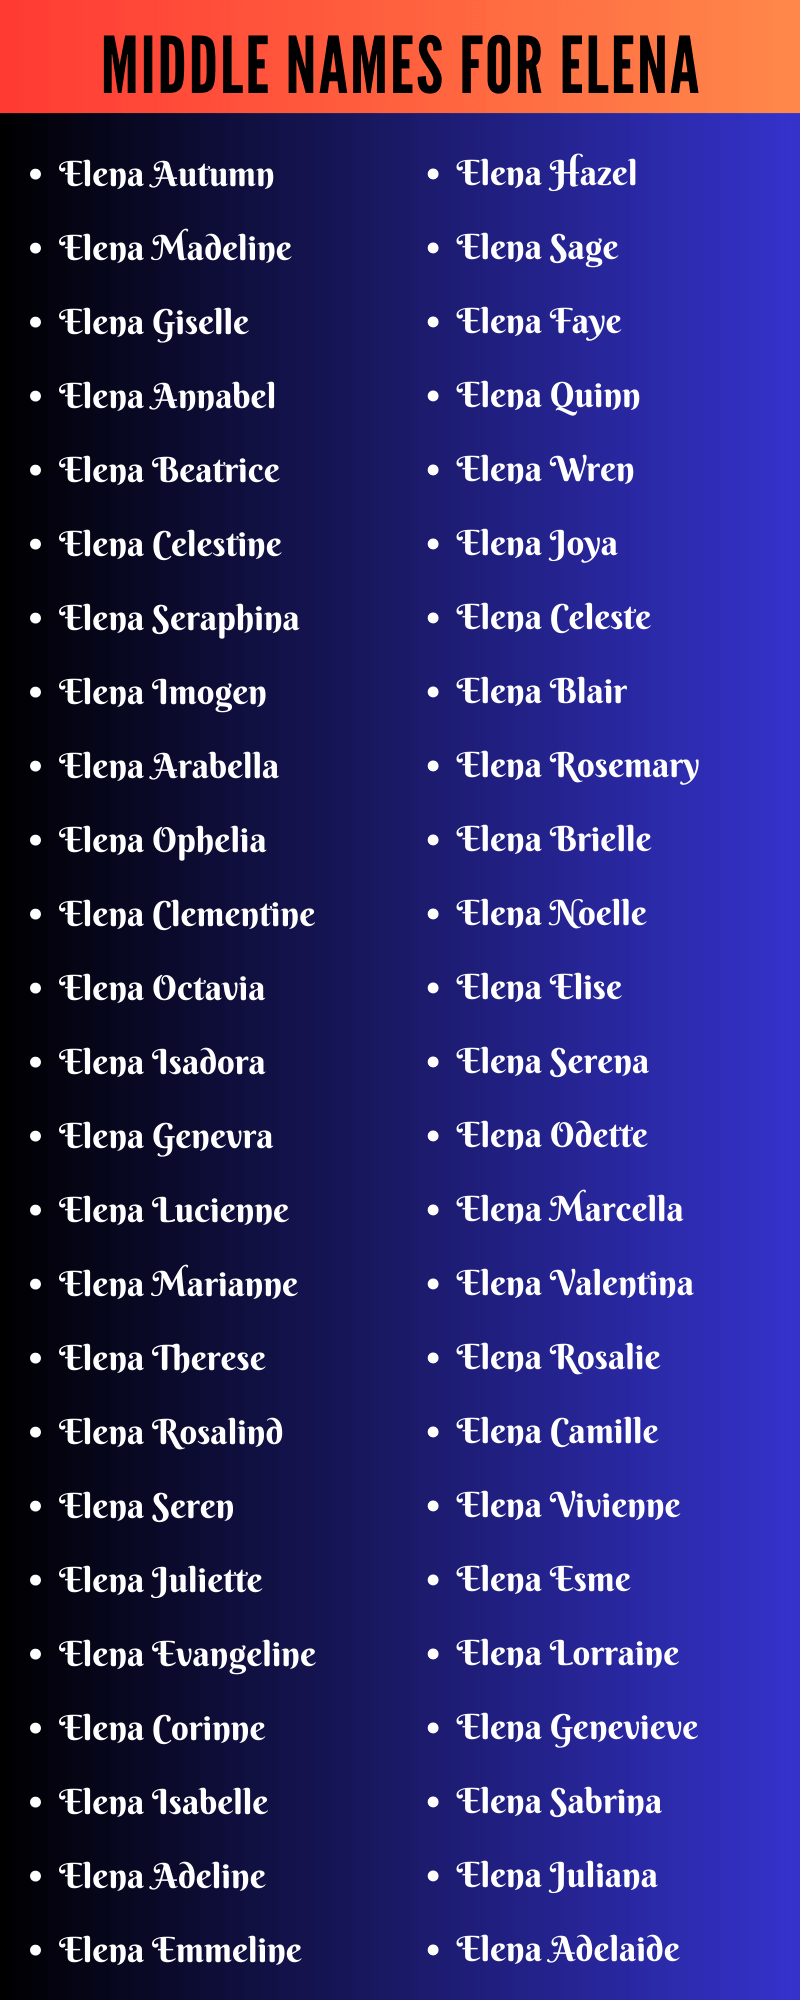 Middle Names For Elena